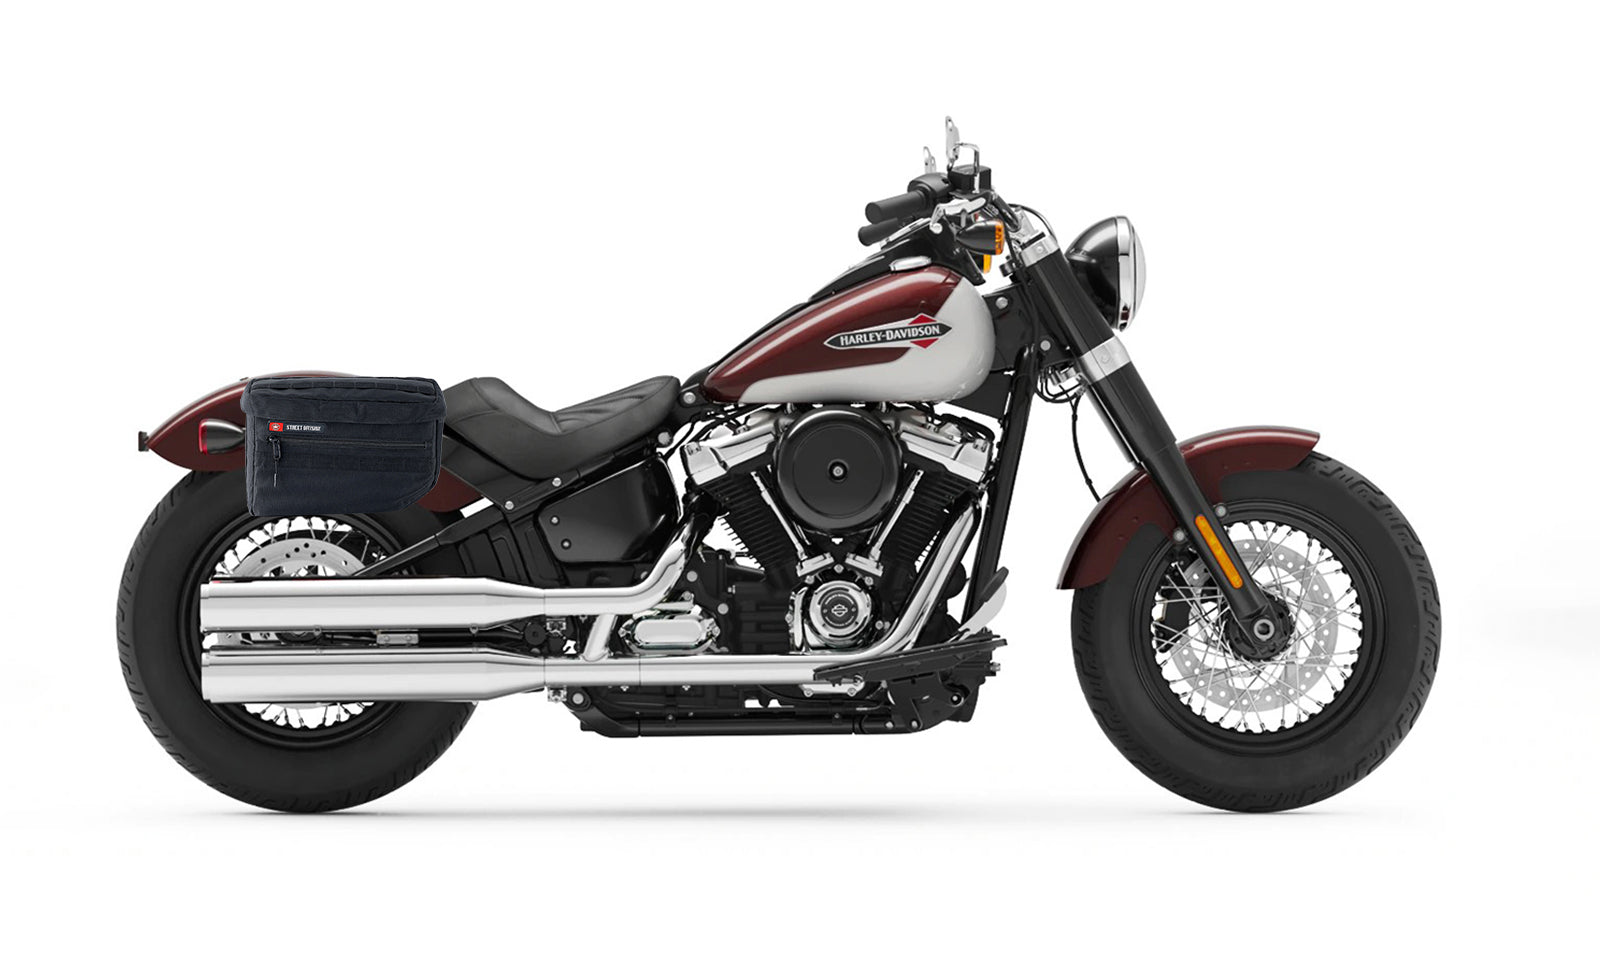 27L - Patriot Large Throw Over Saddlebags for Harley Softail Slim FLSL on Bike Photo @expand